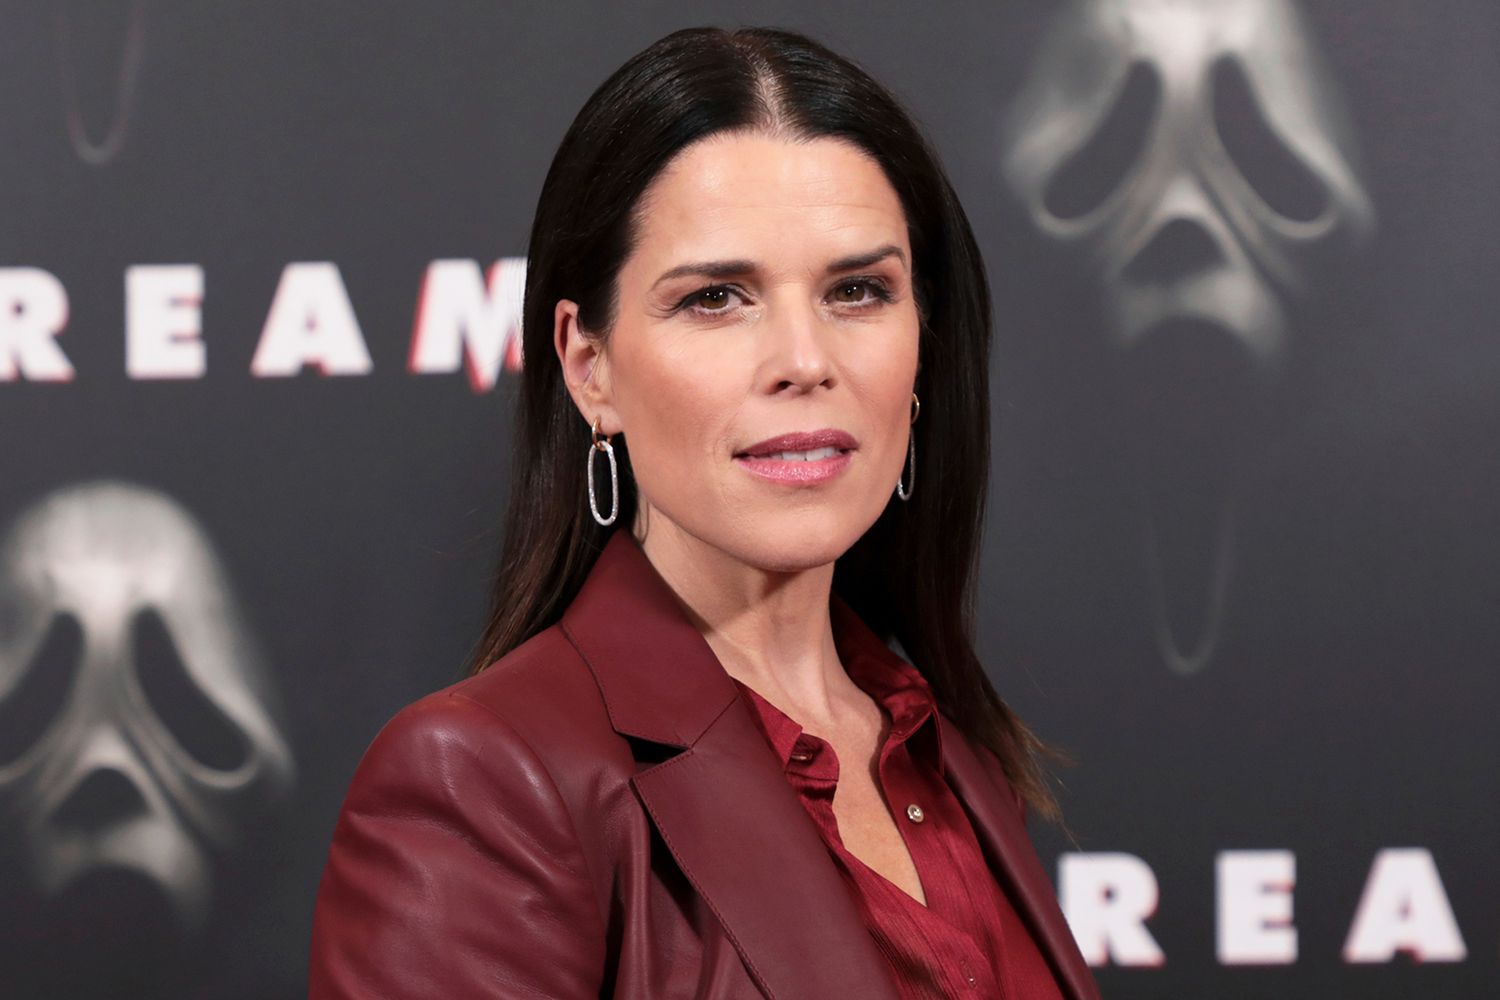 Neve Campbell attends the Paramount Pictures and Spyglass Media Group's "SCREAM" photo call at the Four Seasons Hotel in Beverly Hills, CA on Friday, January 7, 2022.